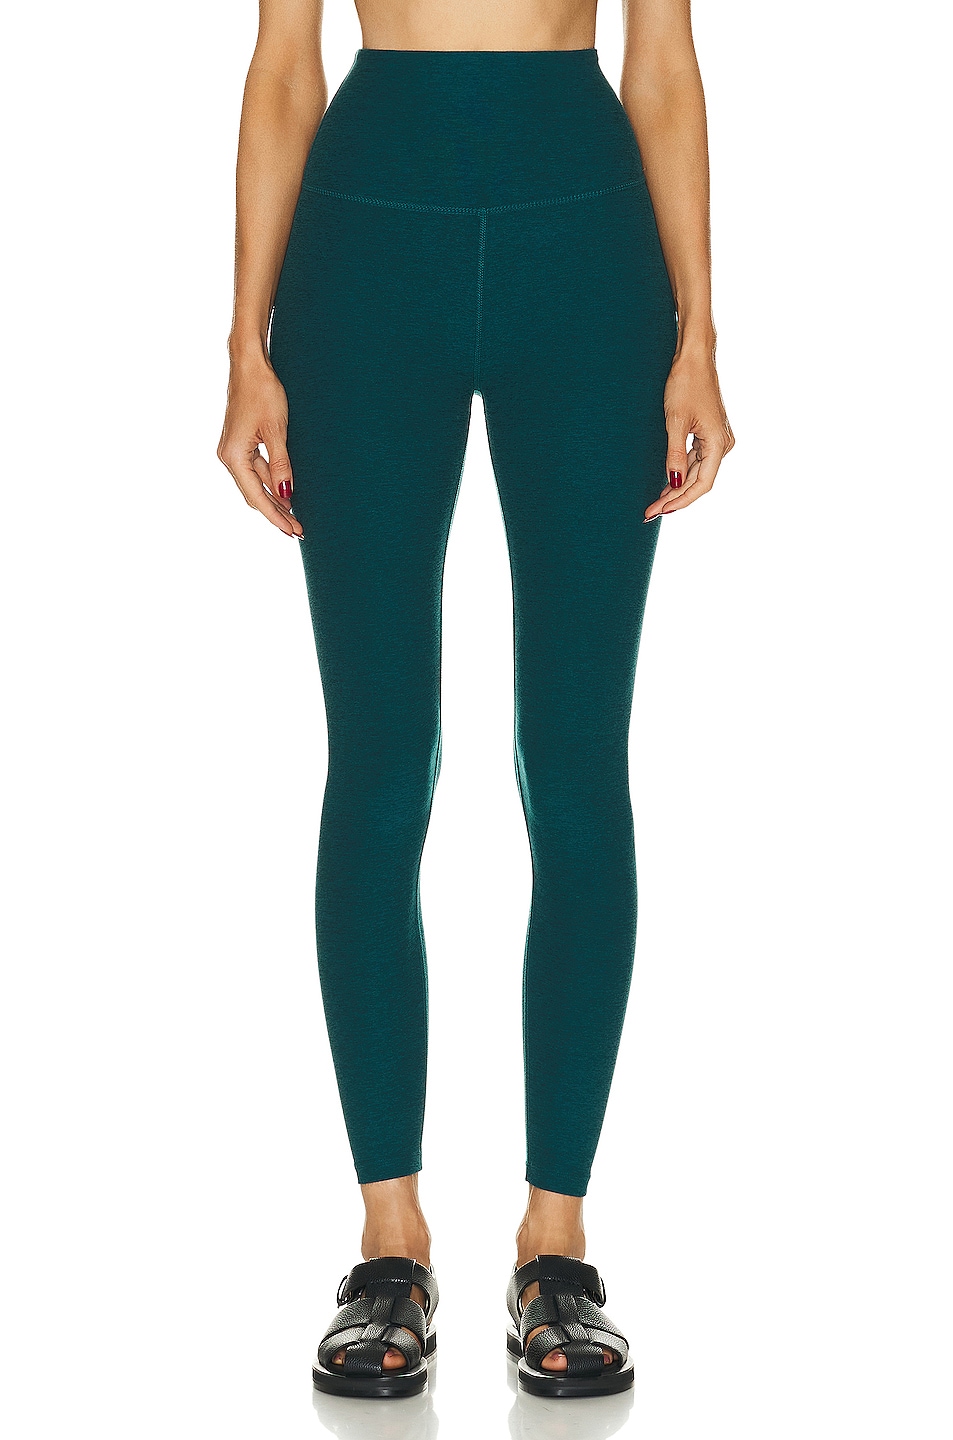 Image 1 of Beyond Yoga Spacedye Caught In The Midi High Waisted Legging in Lunar Teal Heather